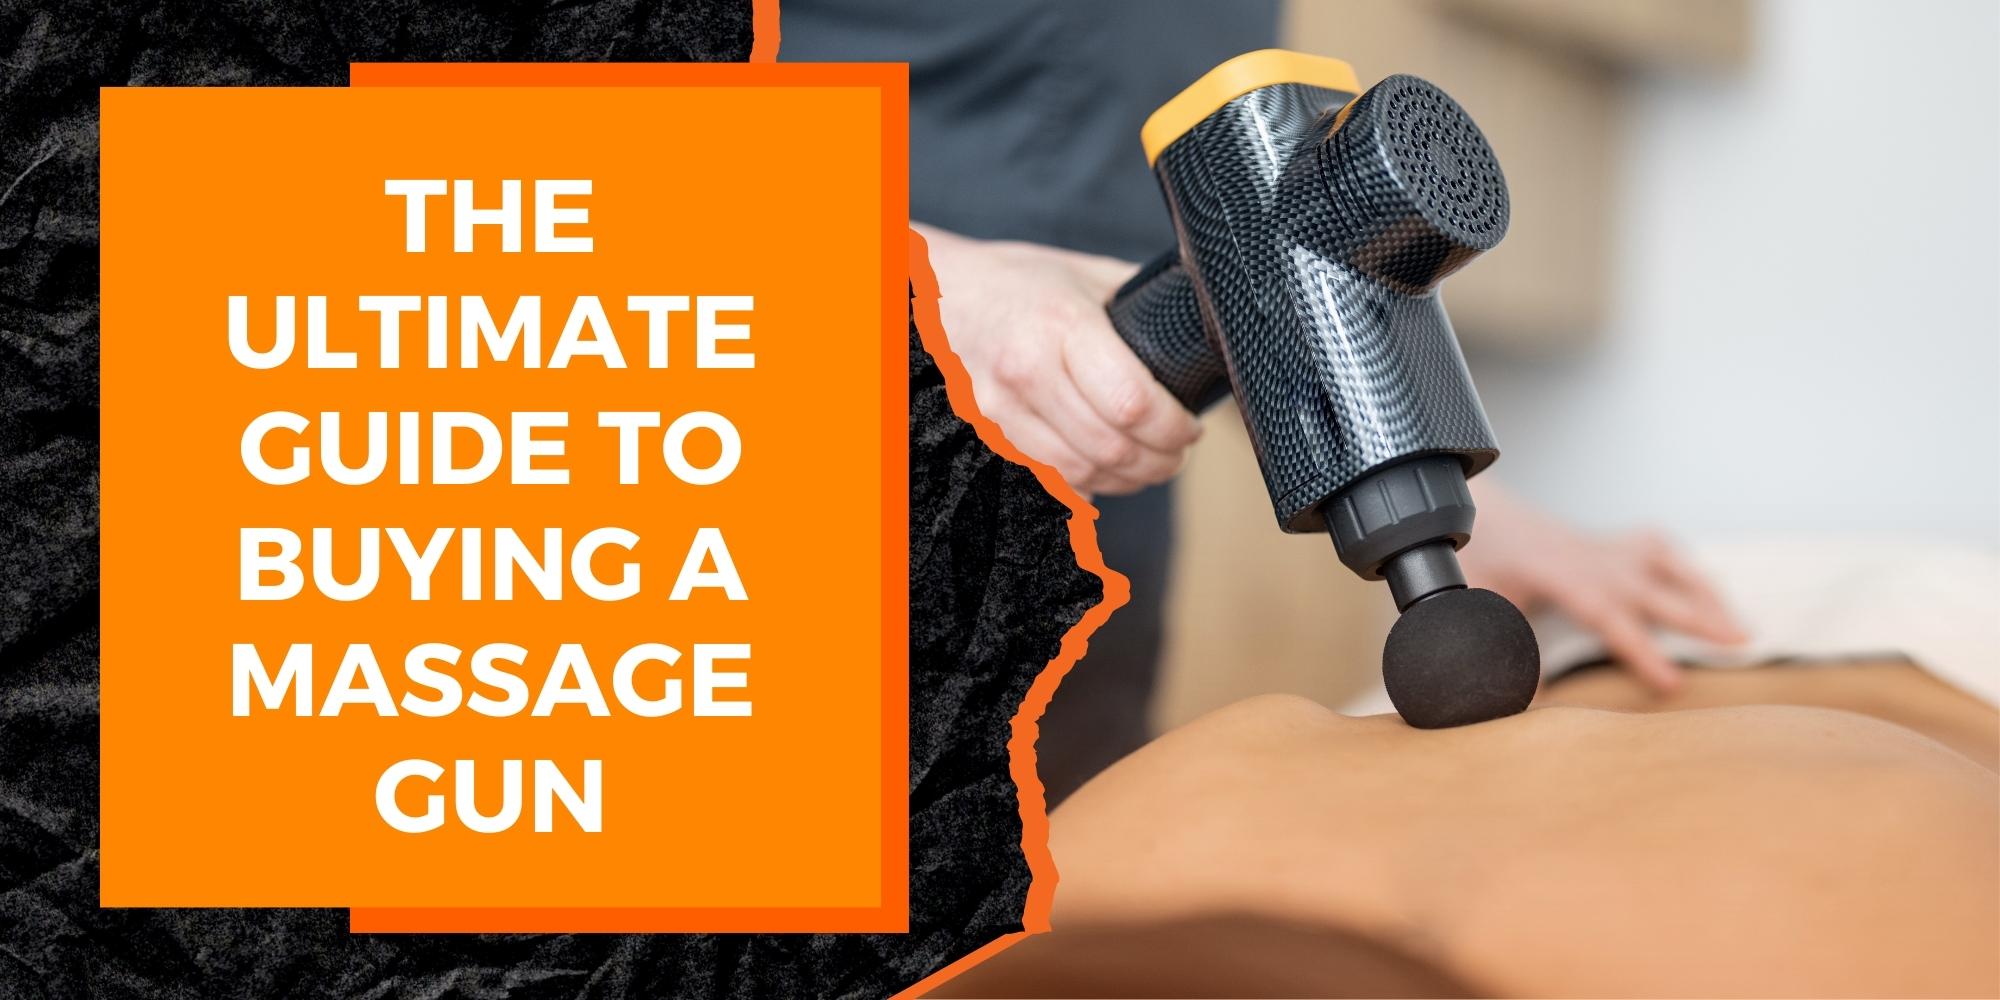 The Ultimate Guide to Buying a Massage Gun